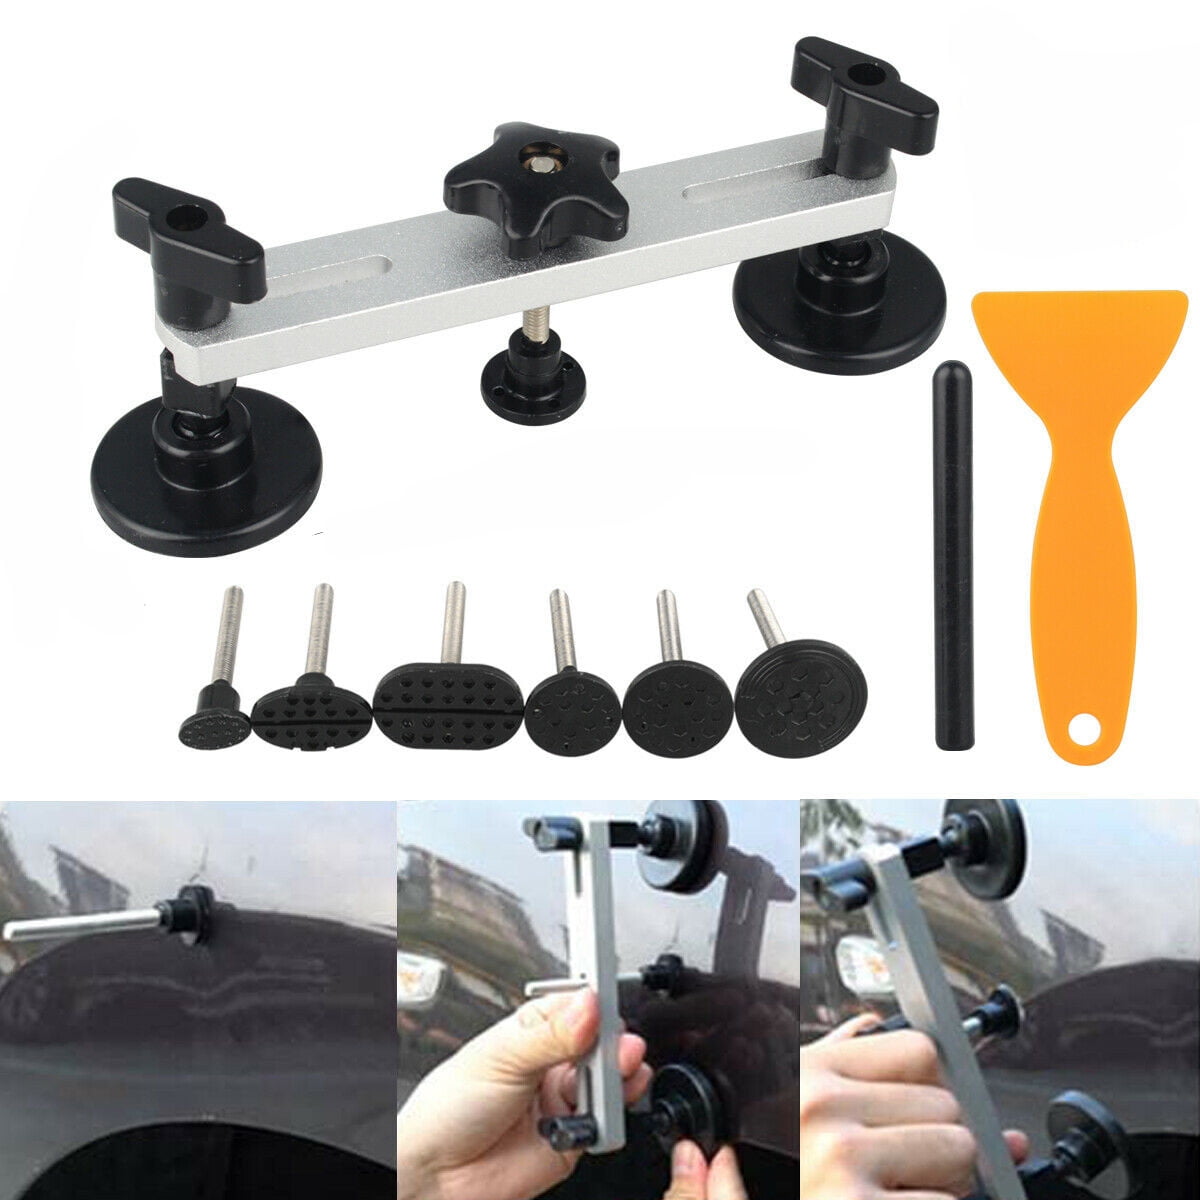 Acouto Bridge Puller Sets Car Body Paintless Dent Removal Repair Tool Kits Silver 